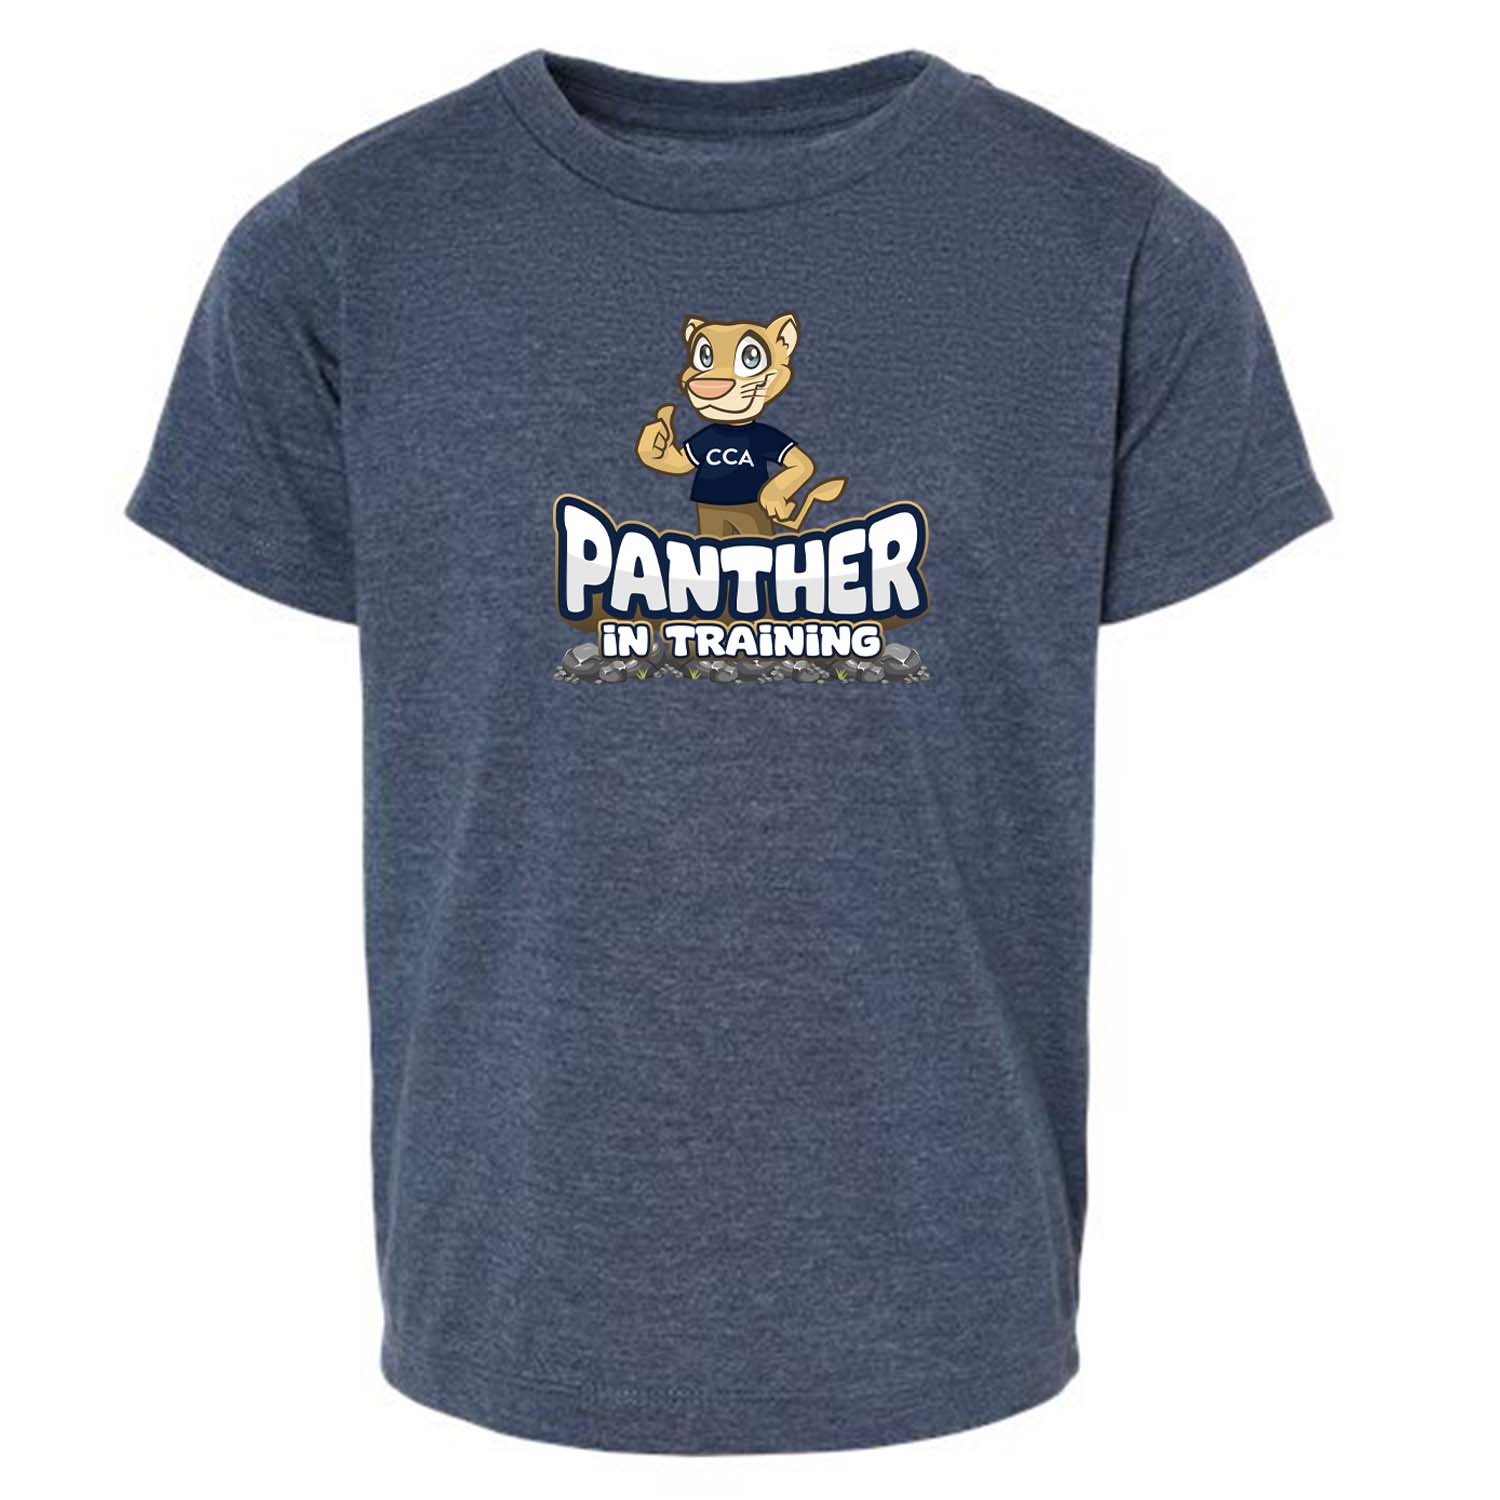 Panther in Training t-shirt (preschool only) - ShockSocks